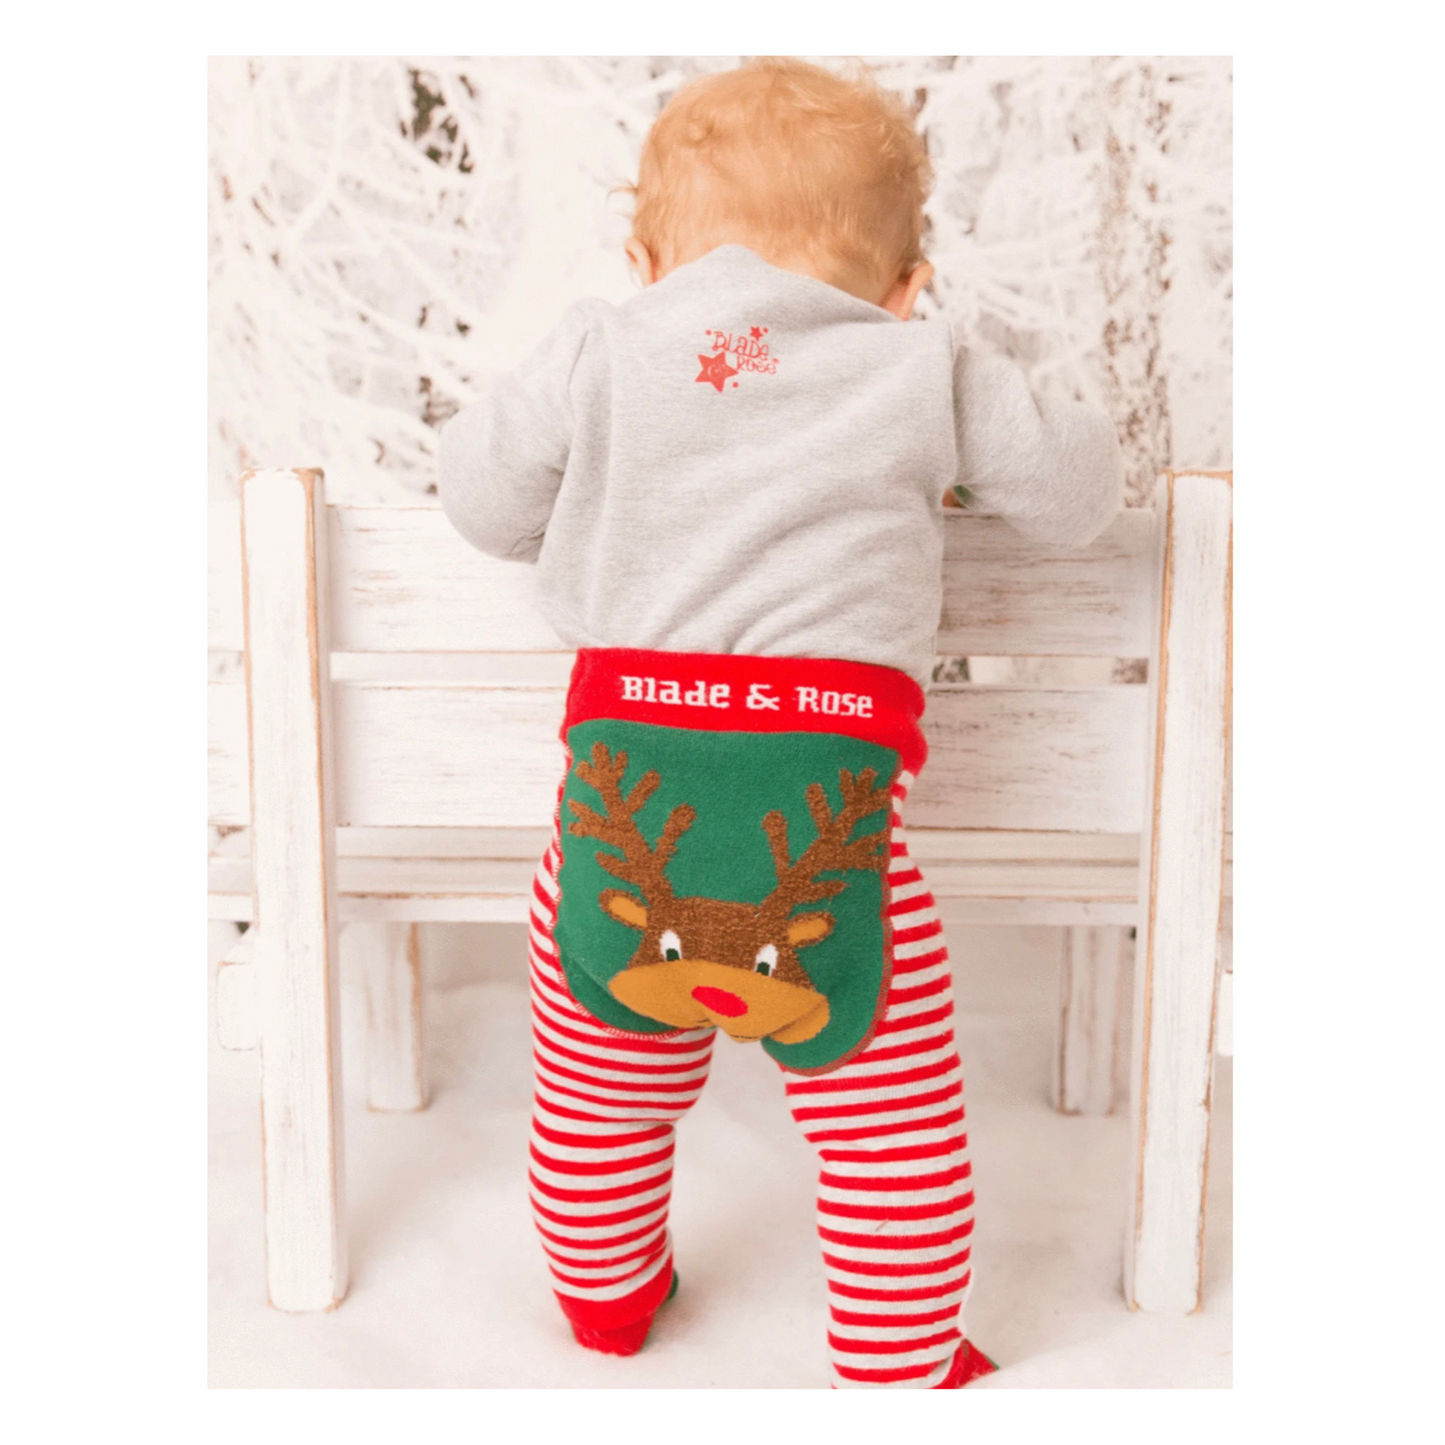 Blade & Rose 3 Piece Red Red  Reindeer Outfit